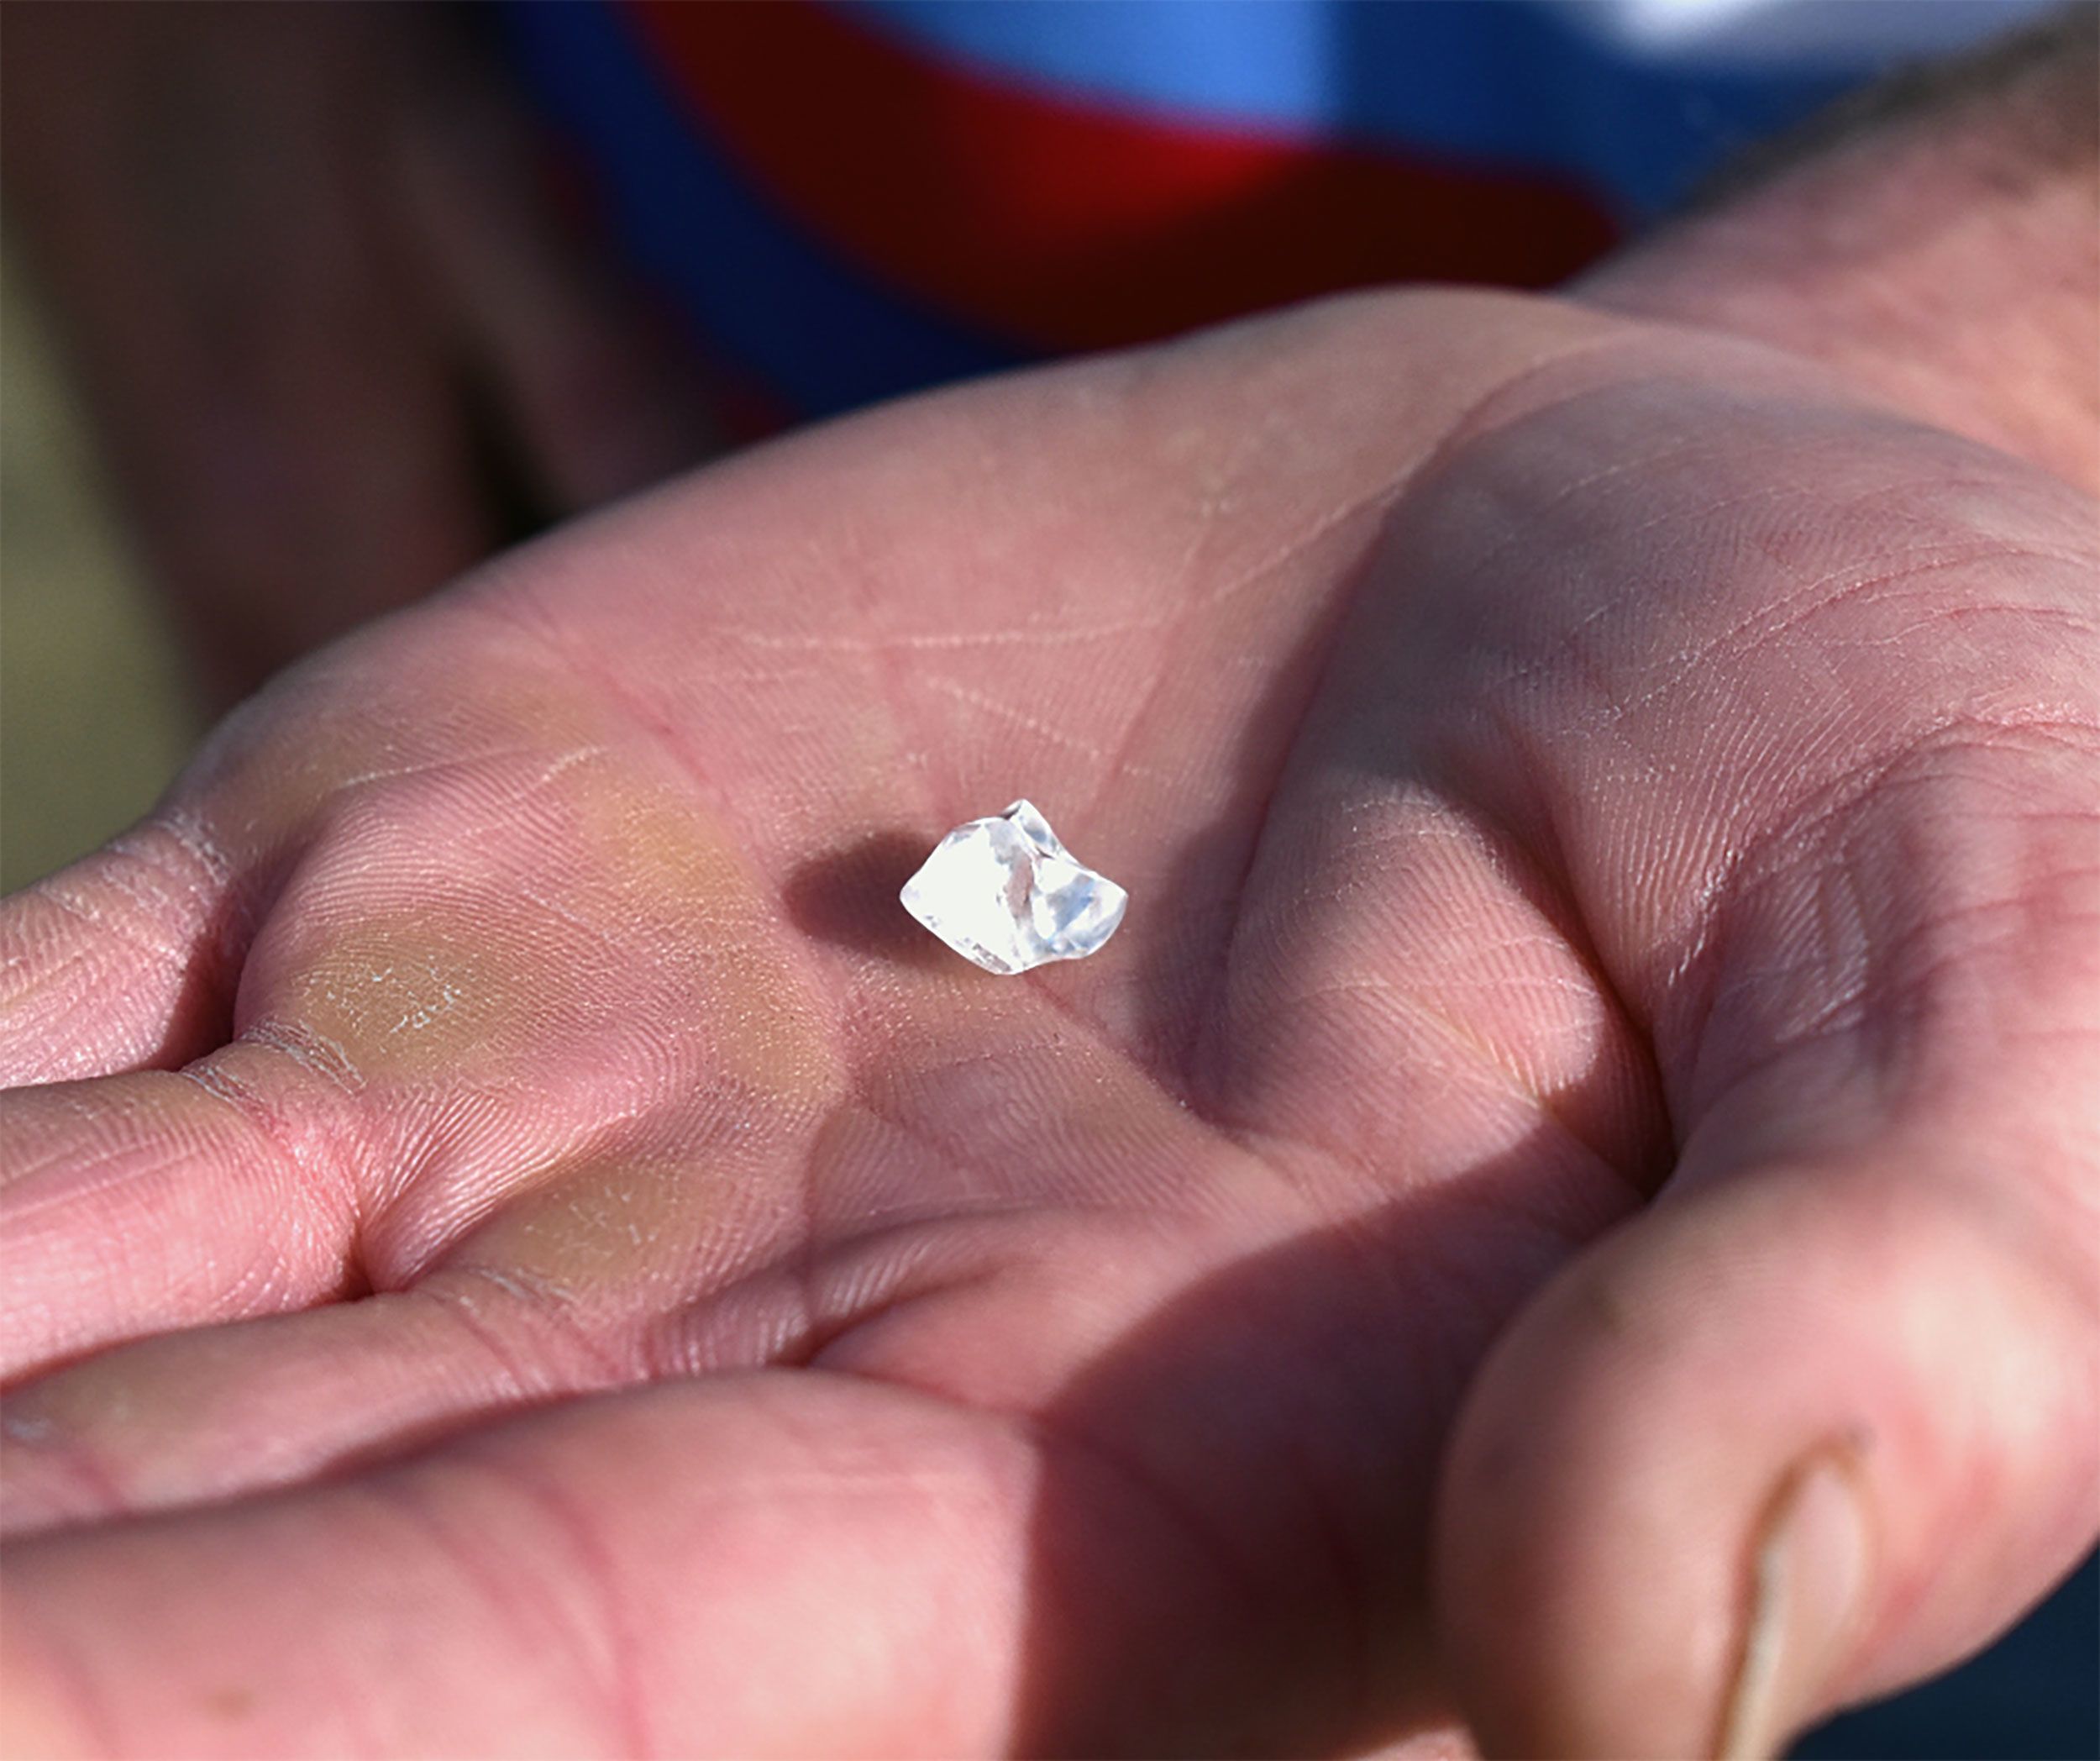 Shown is a close-up of the 4.87-carat diamond discovered in the Crater of Diamonds State Park in Mu...